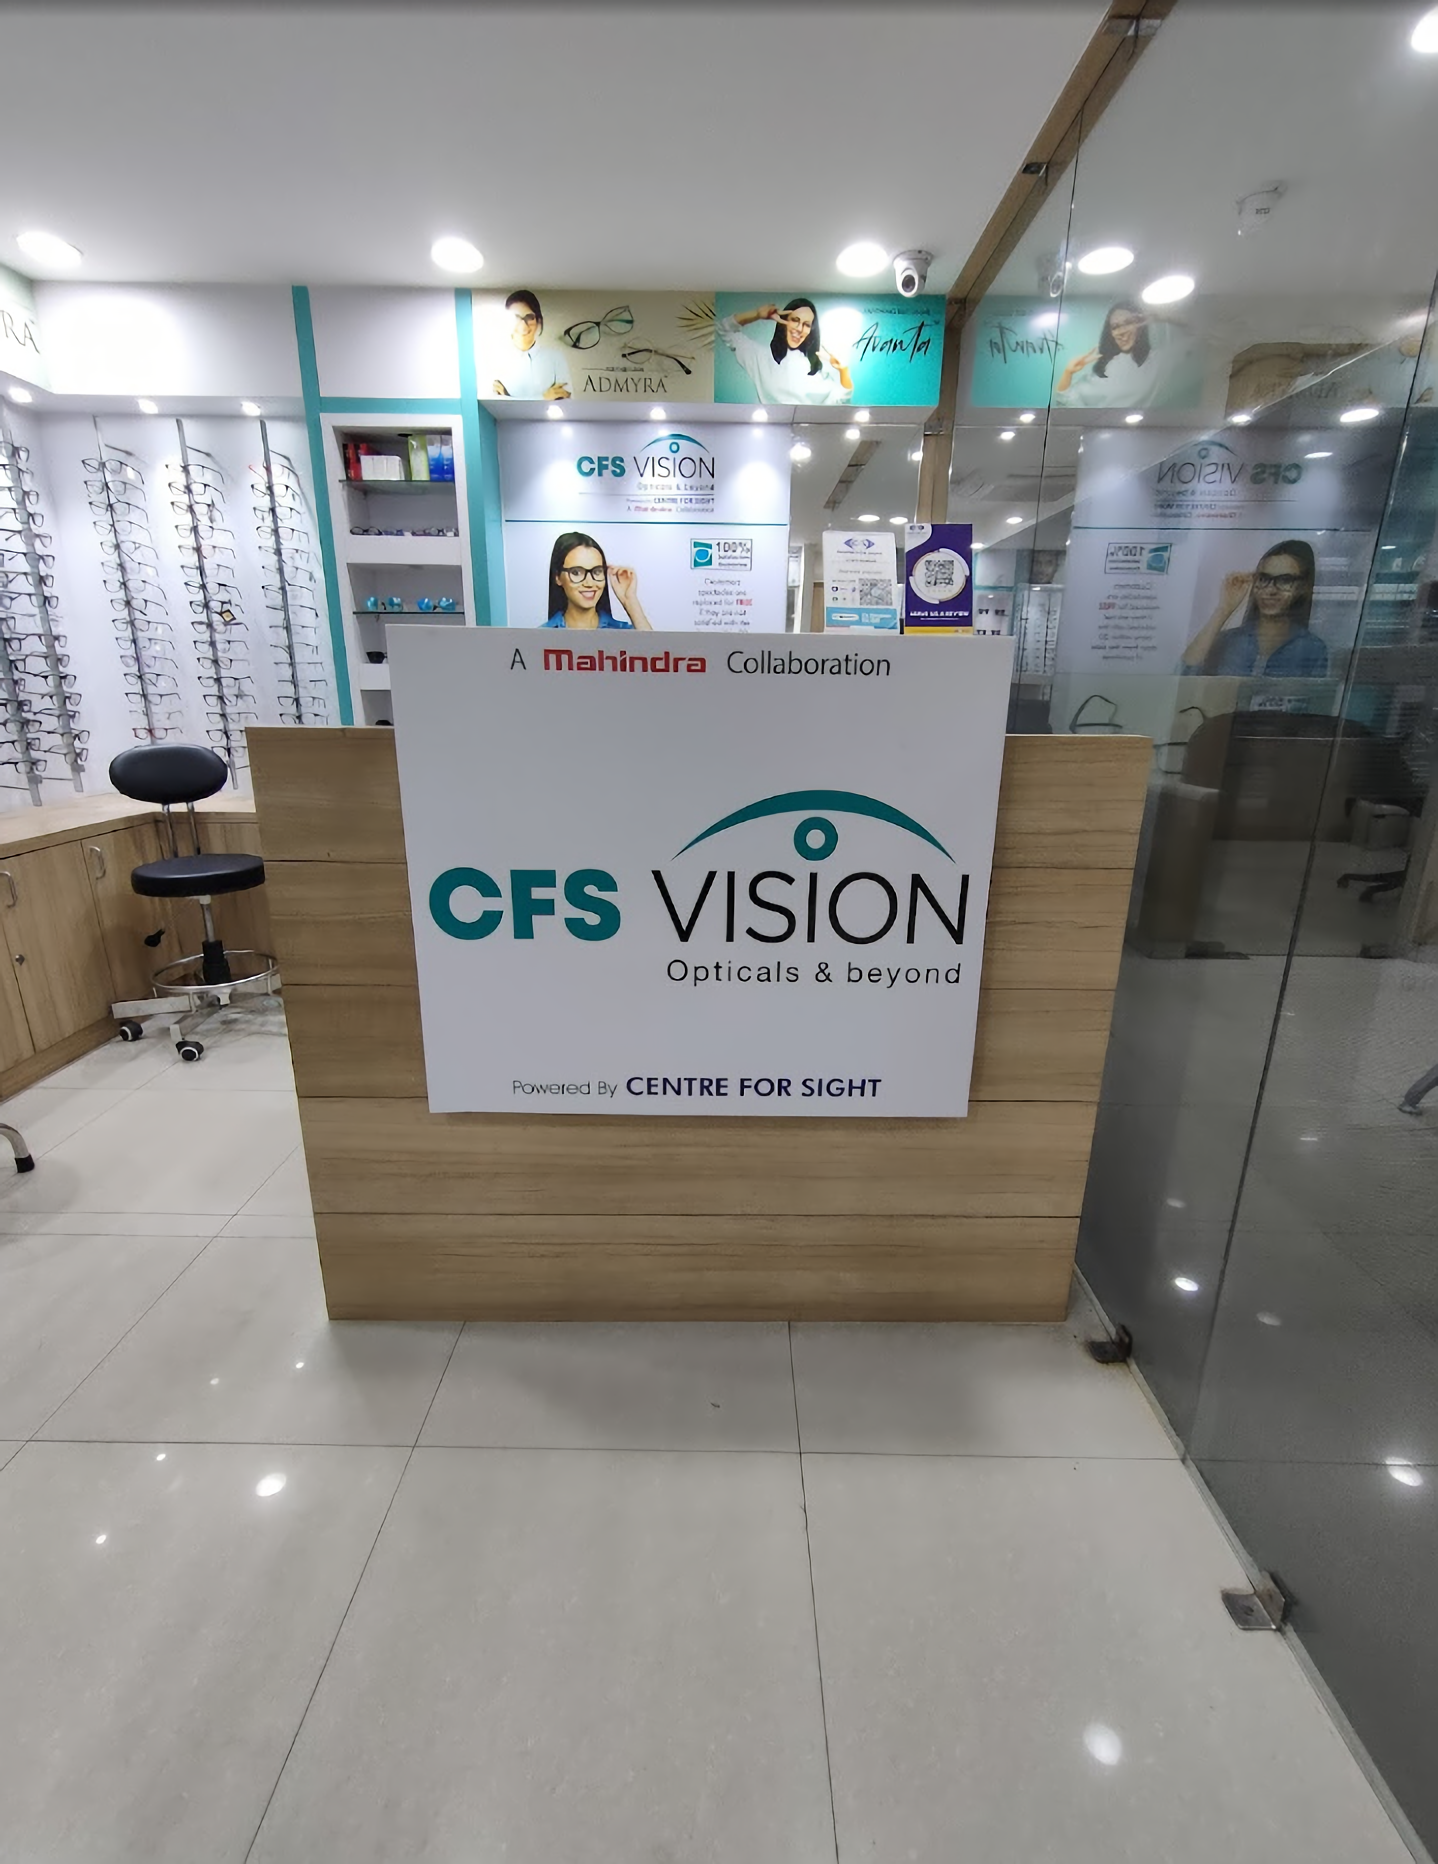 Centre For Sight